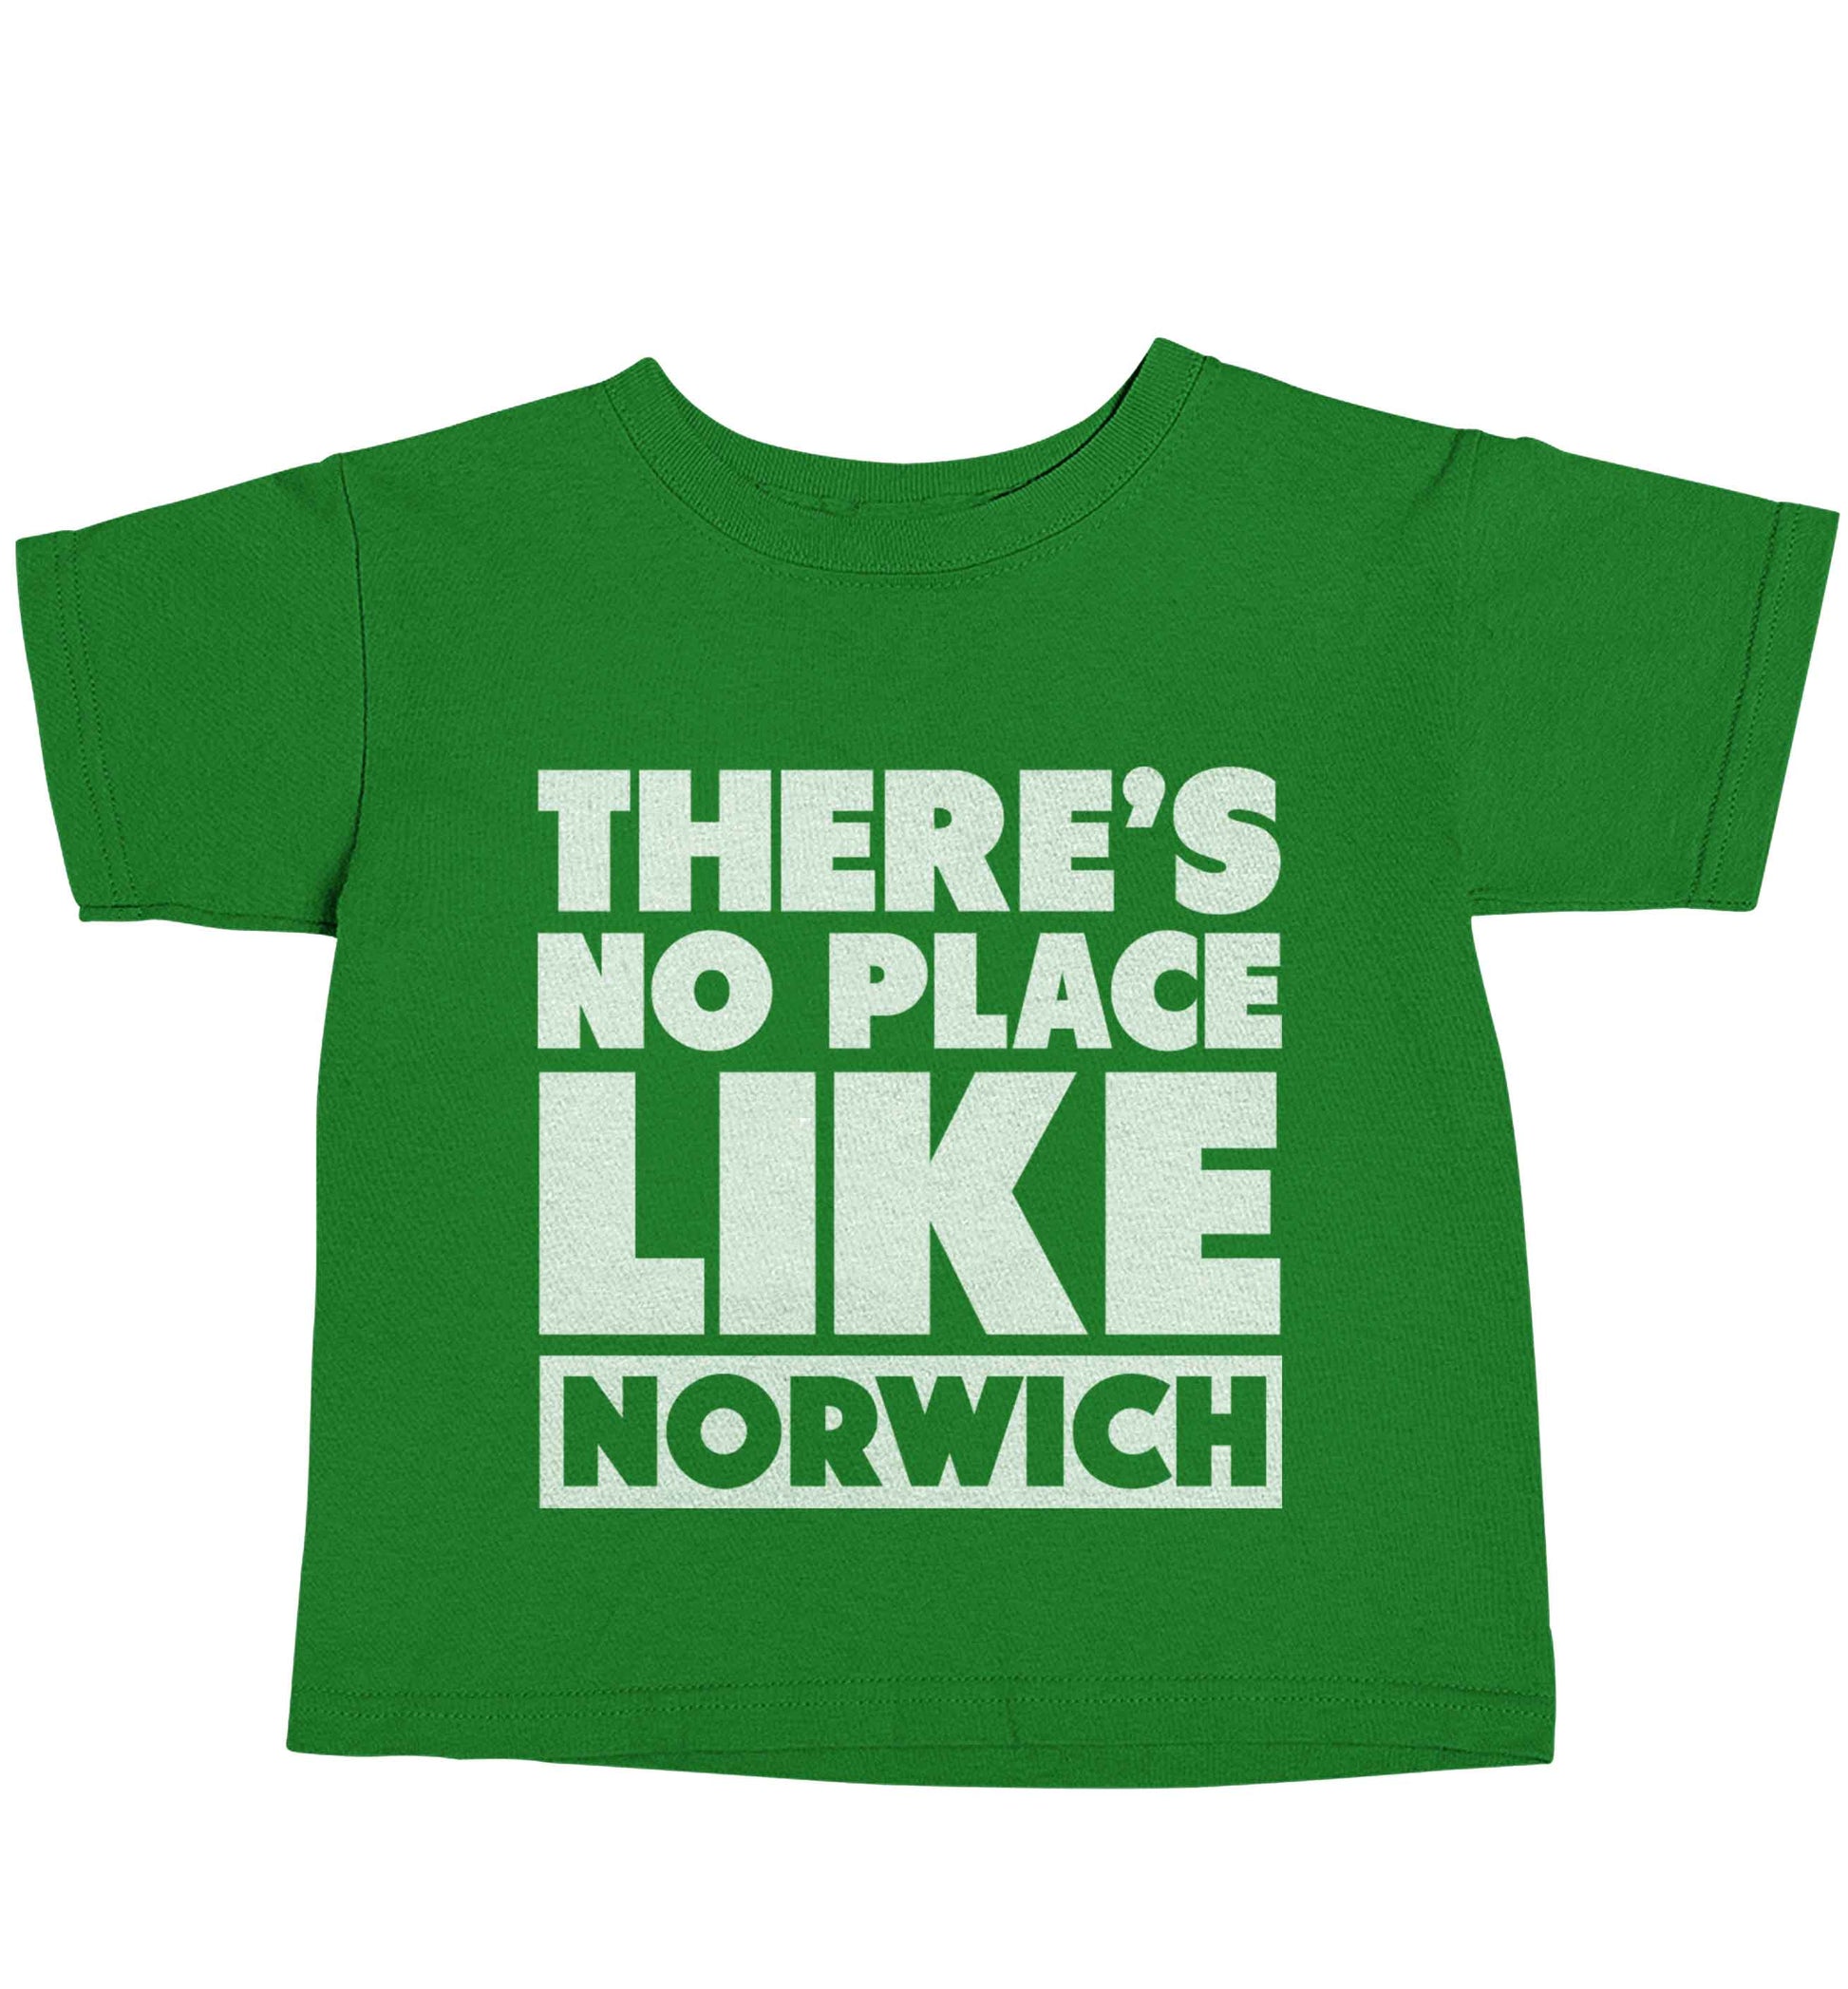 There's no place like Norwich green baby toddler Tshirt 2 Years